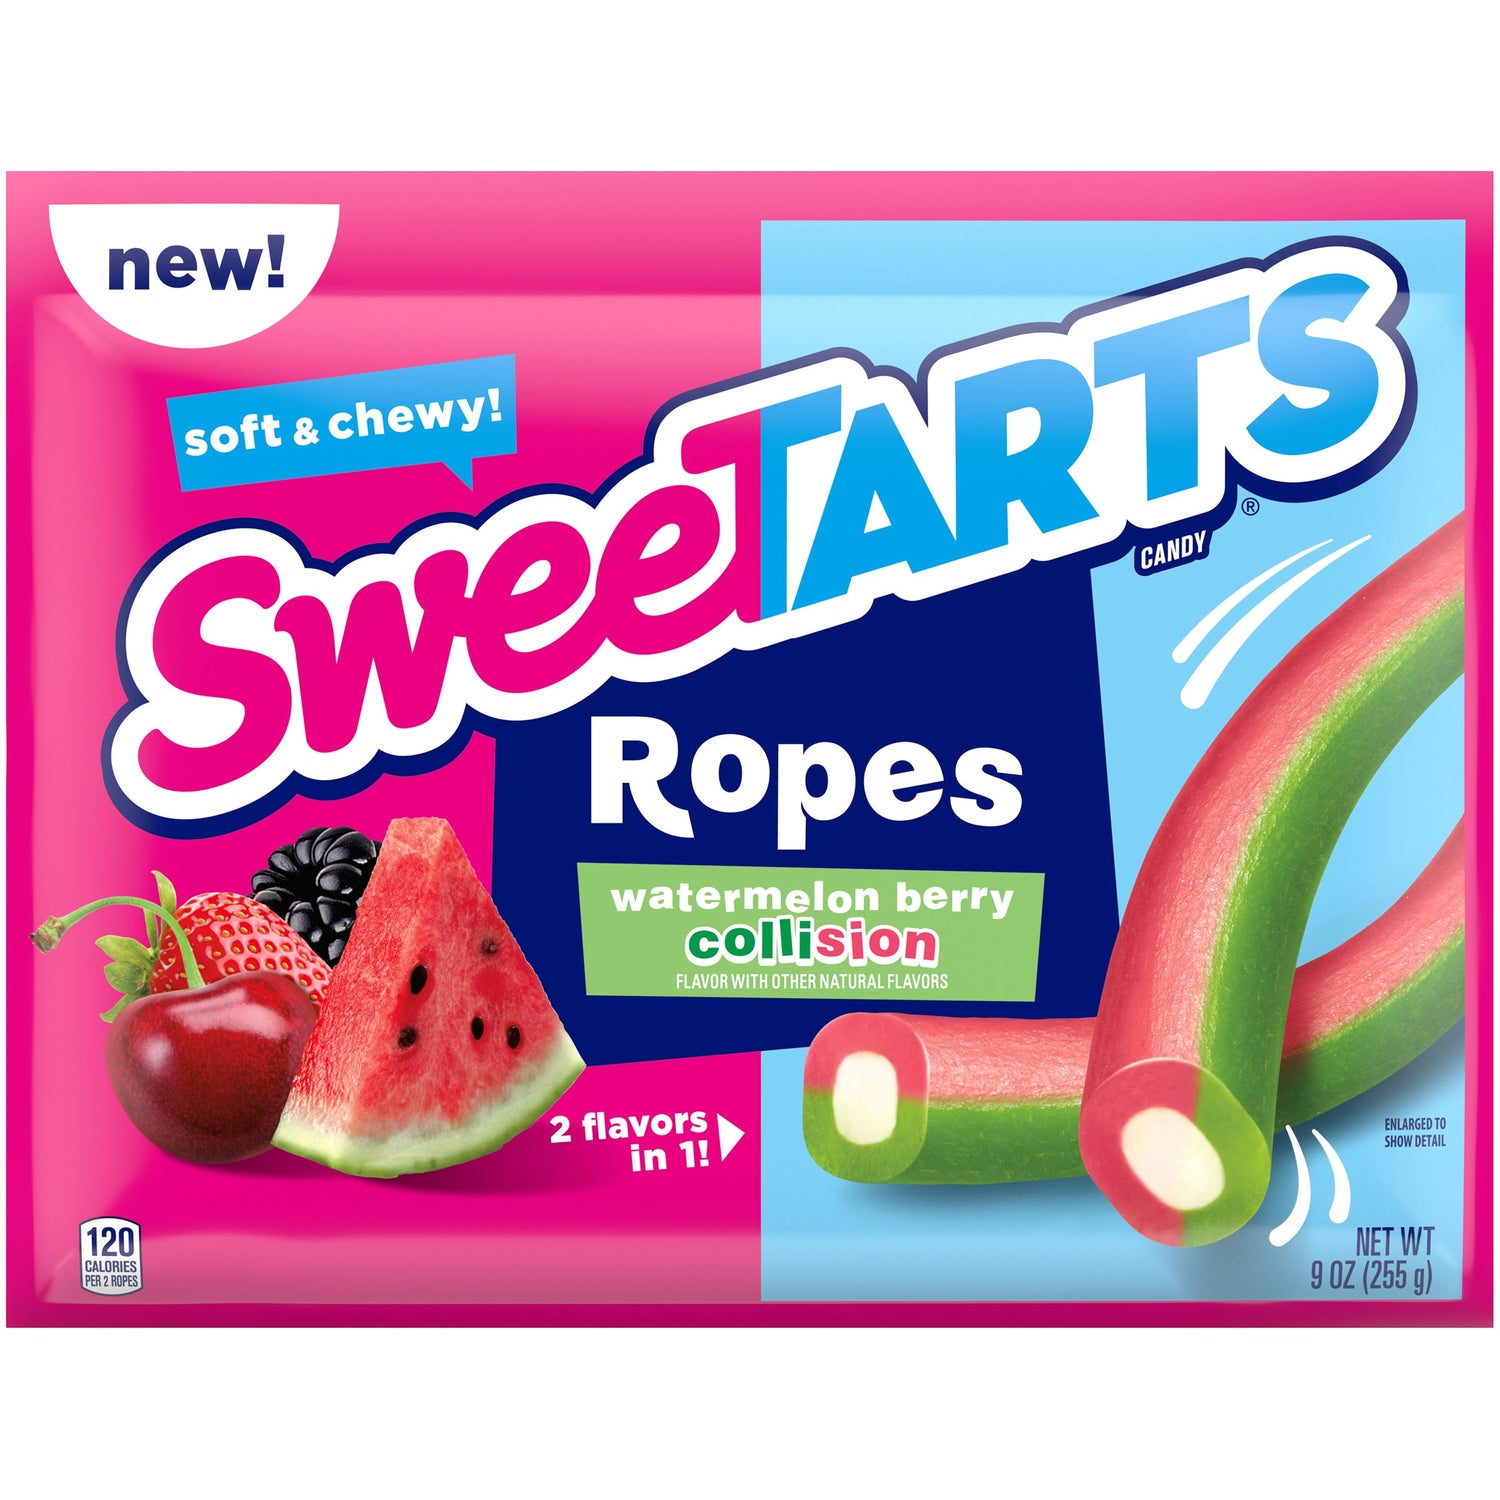 Sweetarts Rope Watermelon Berry Collision Sharepack 3.5oz X 12 Units - Québec Candy